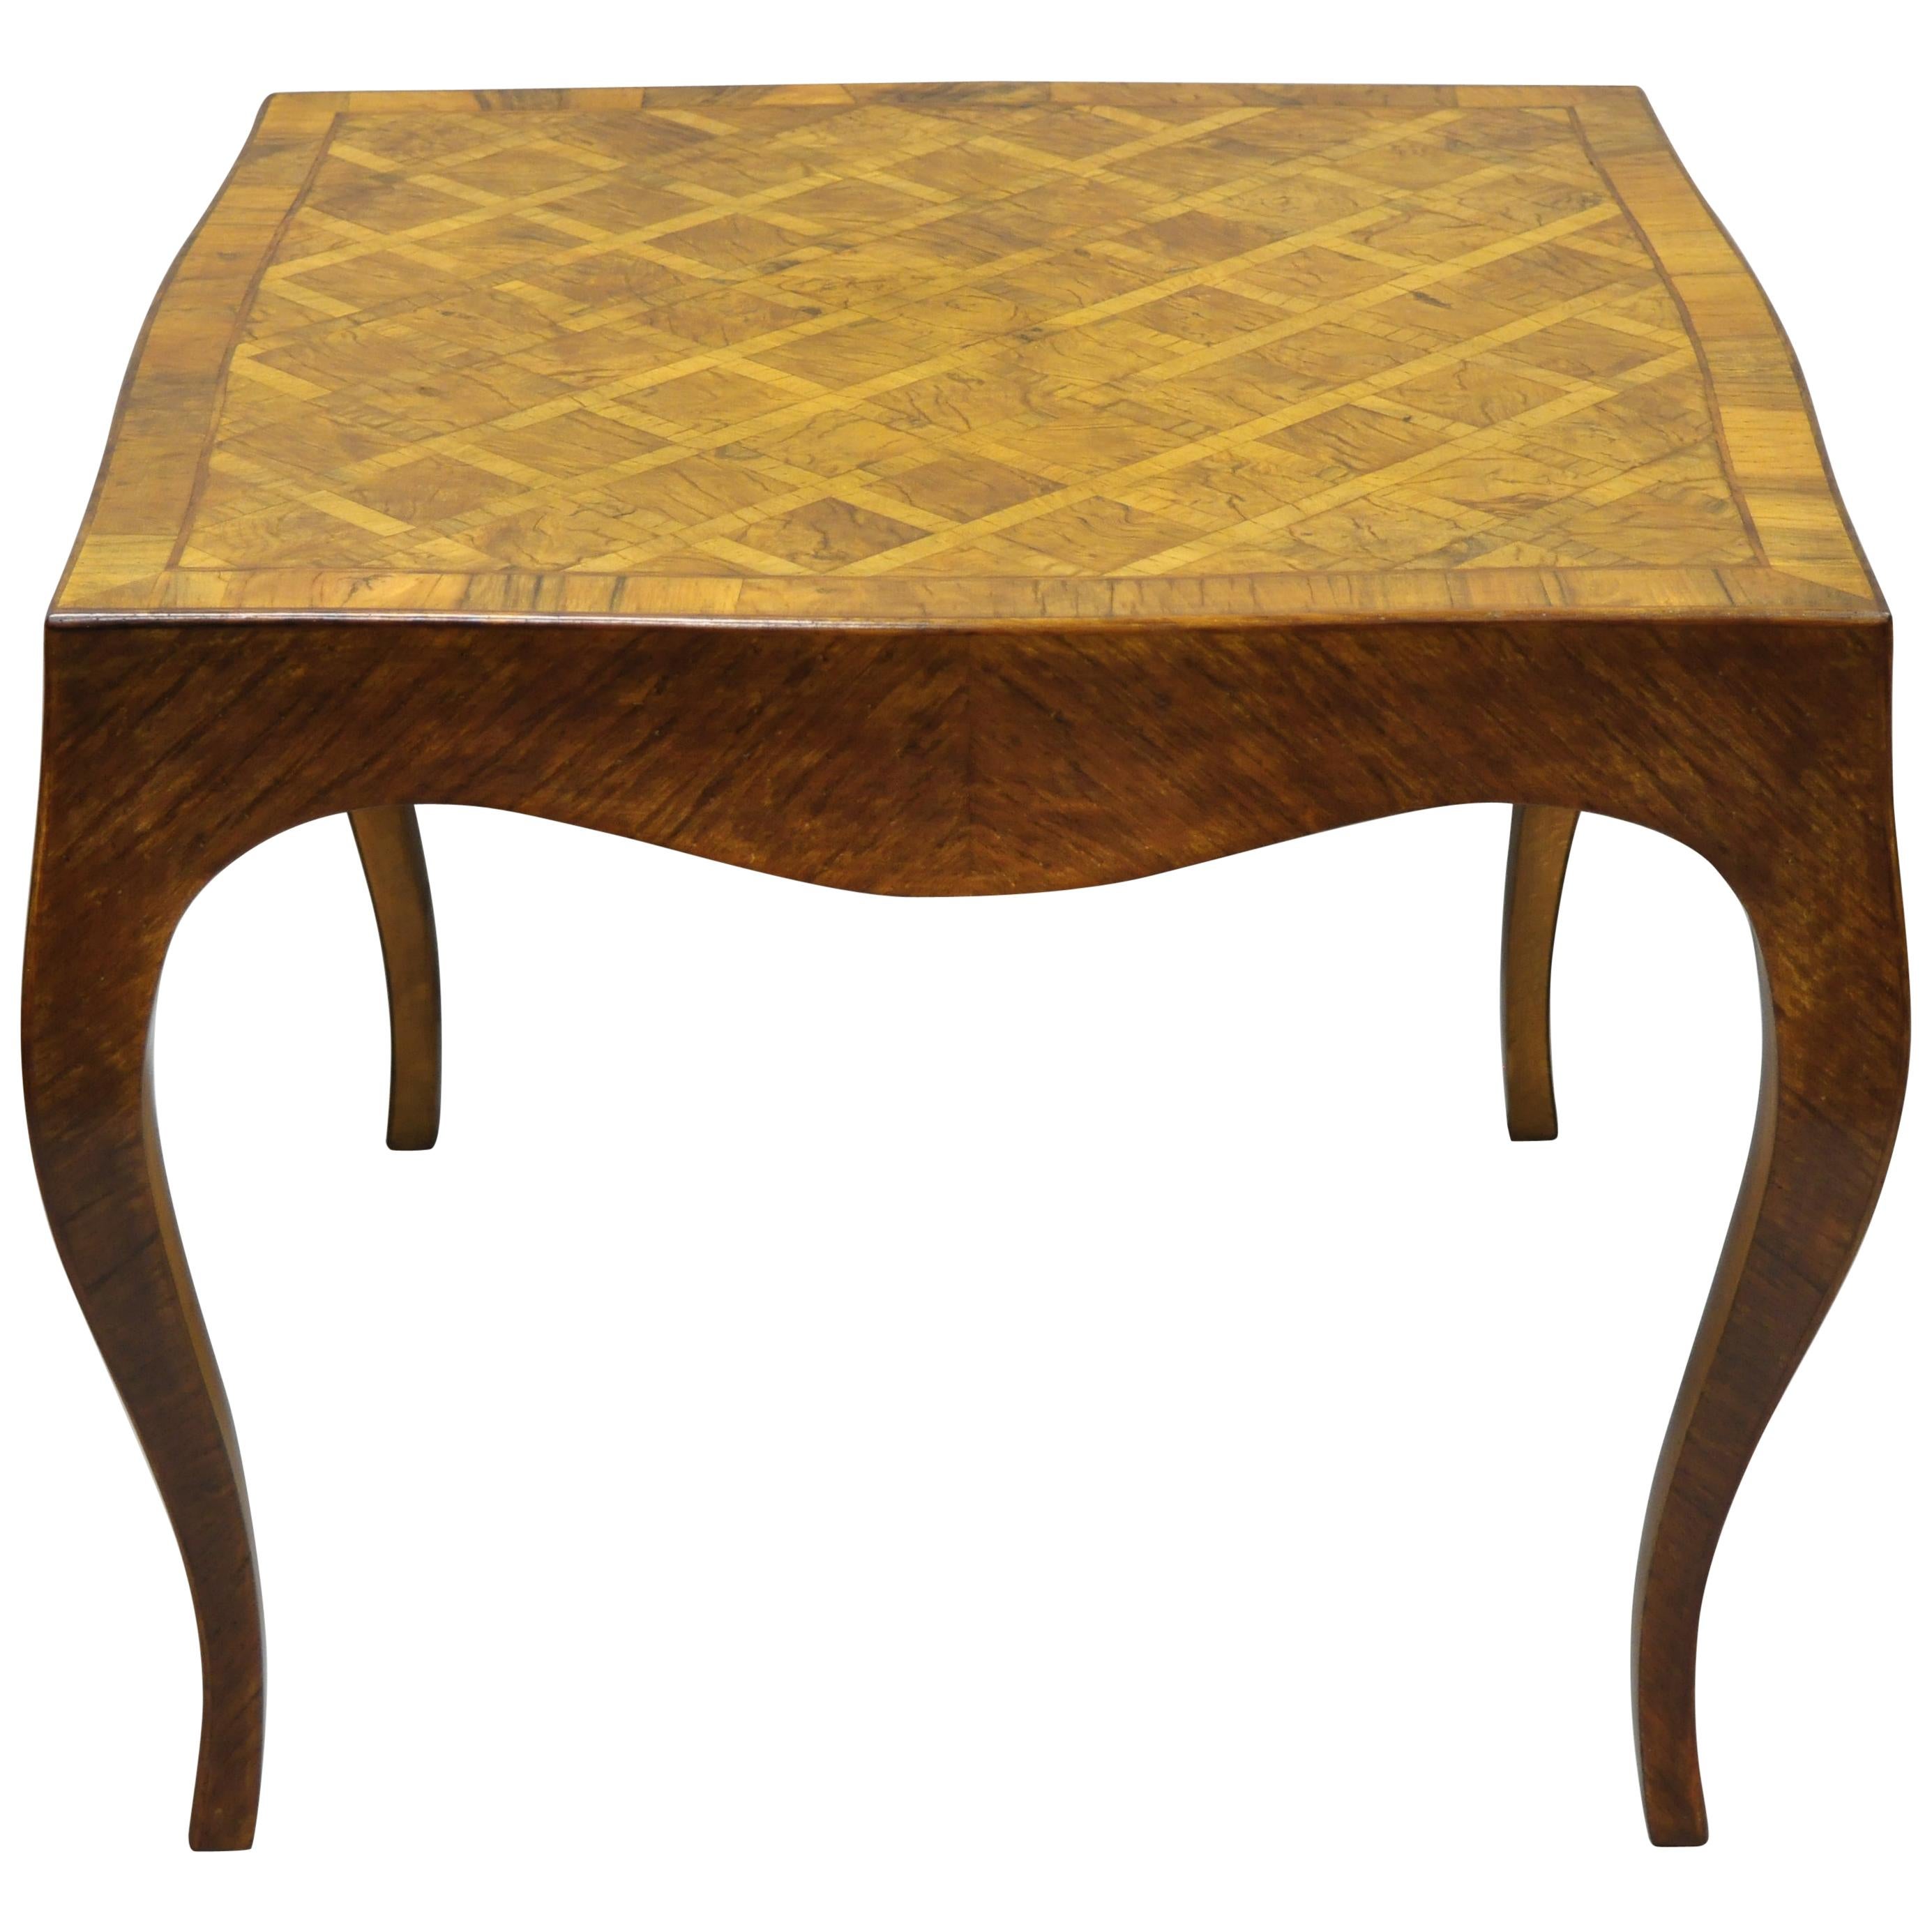 Italian Parquetry Inlay Olive Wood Square Coffee Side Table Louis XV Style For Sale